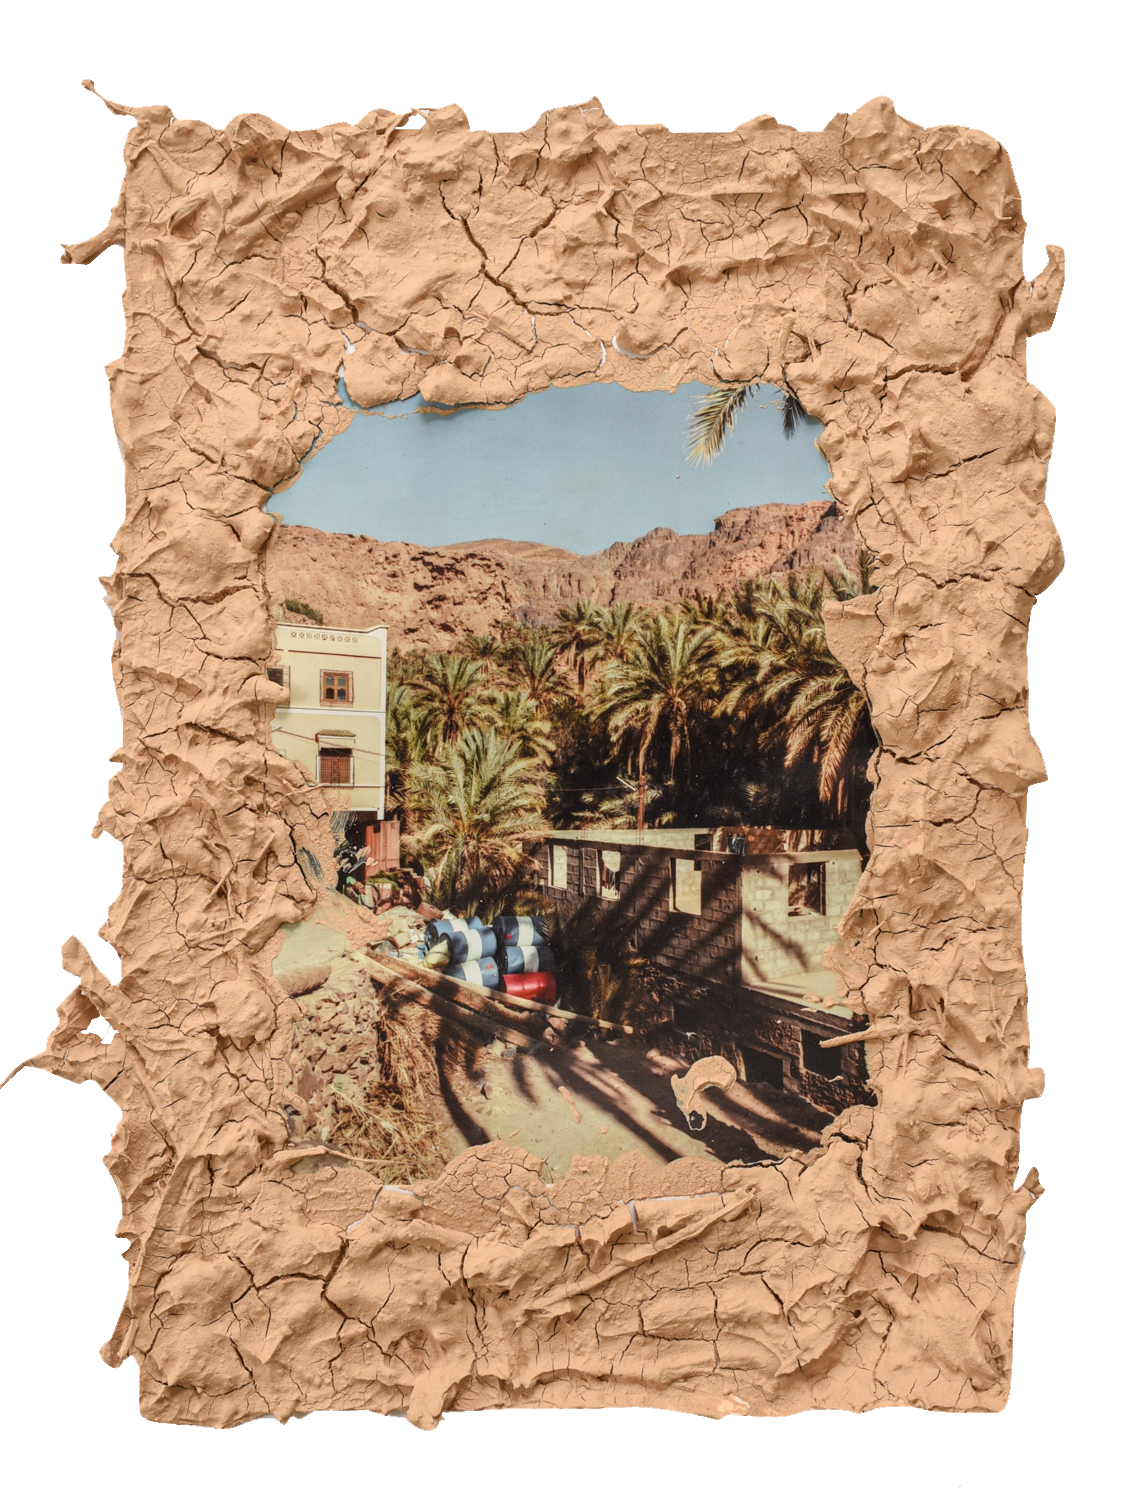 Image framed by soil, showing buildings in an Moroccon oasis.